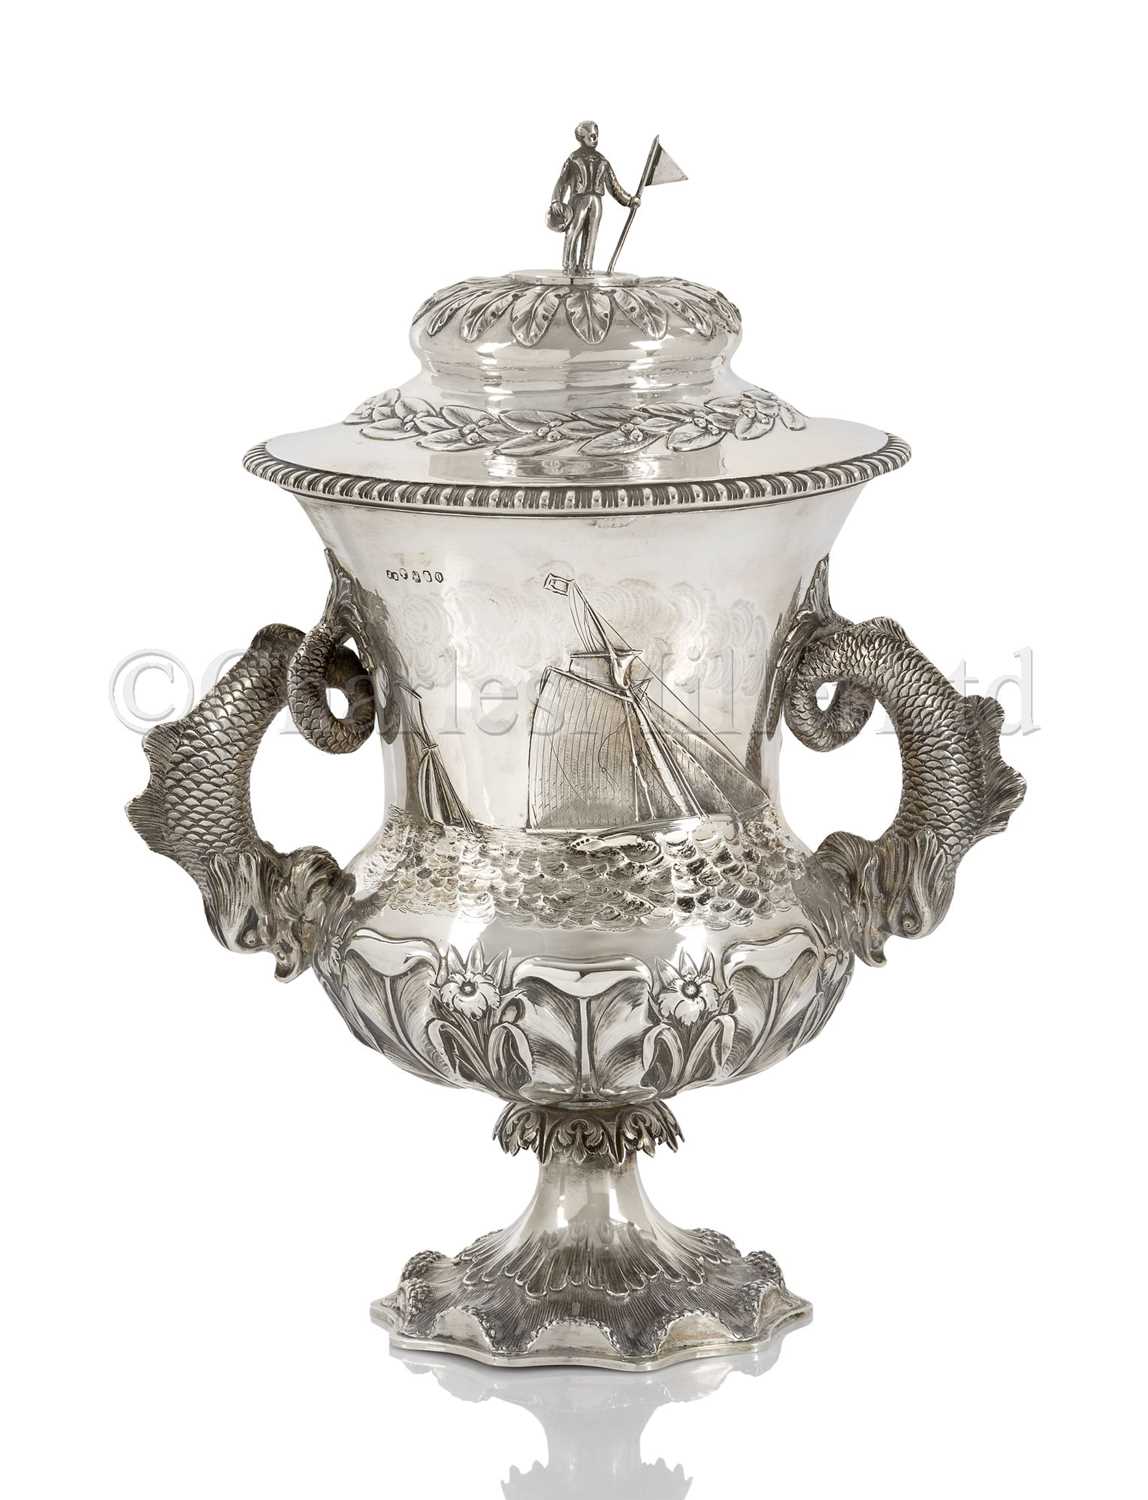 Lot 29 - A VICTORIAN IRISH SILVER YACHTING TROPHY